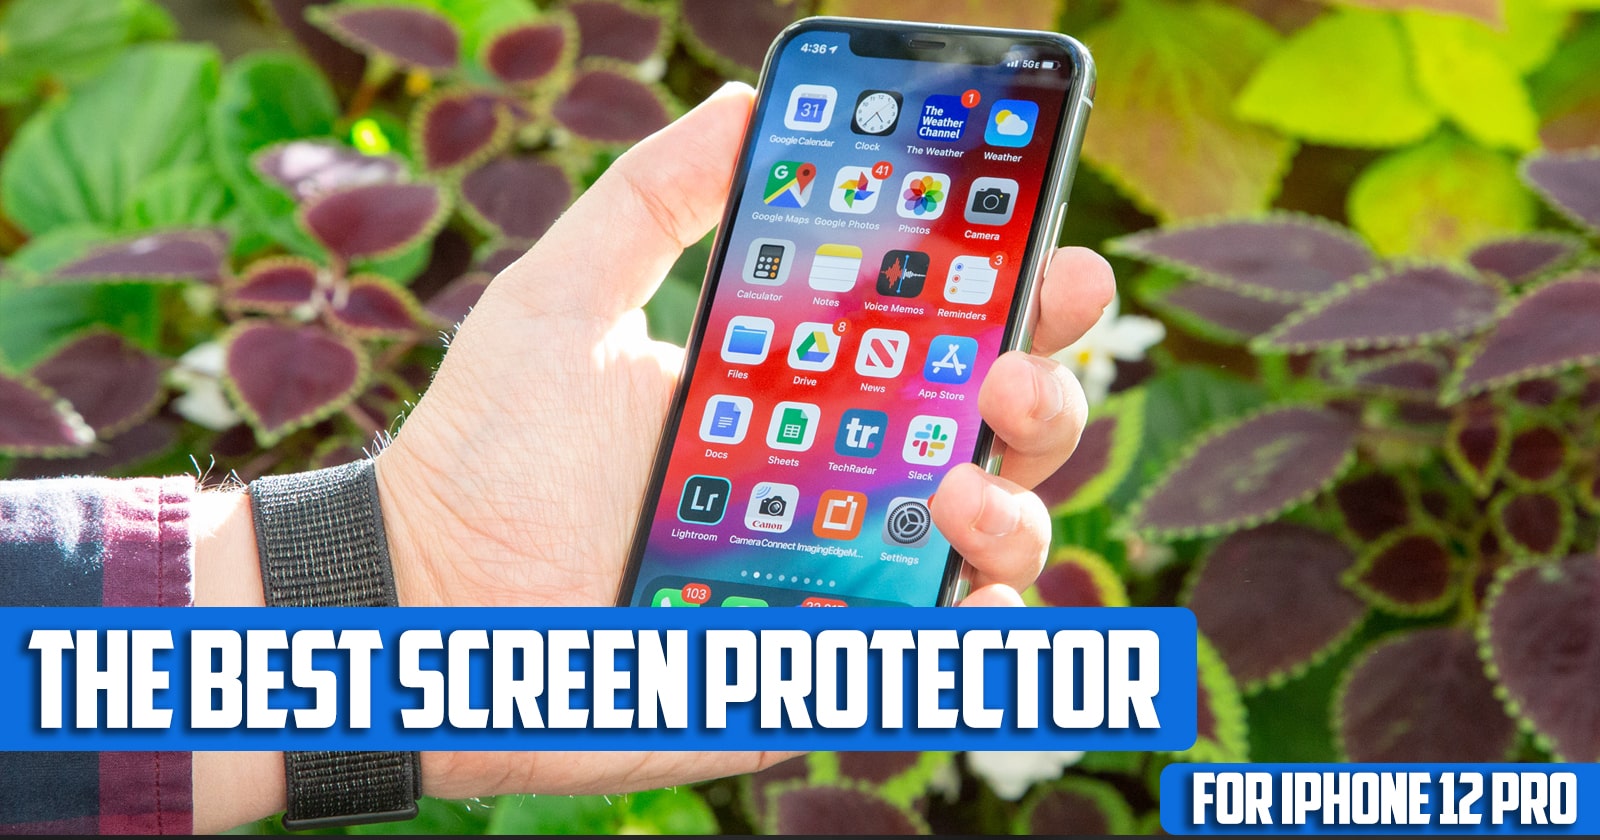 What is the best screen protector for iphone 12 pro